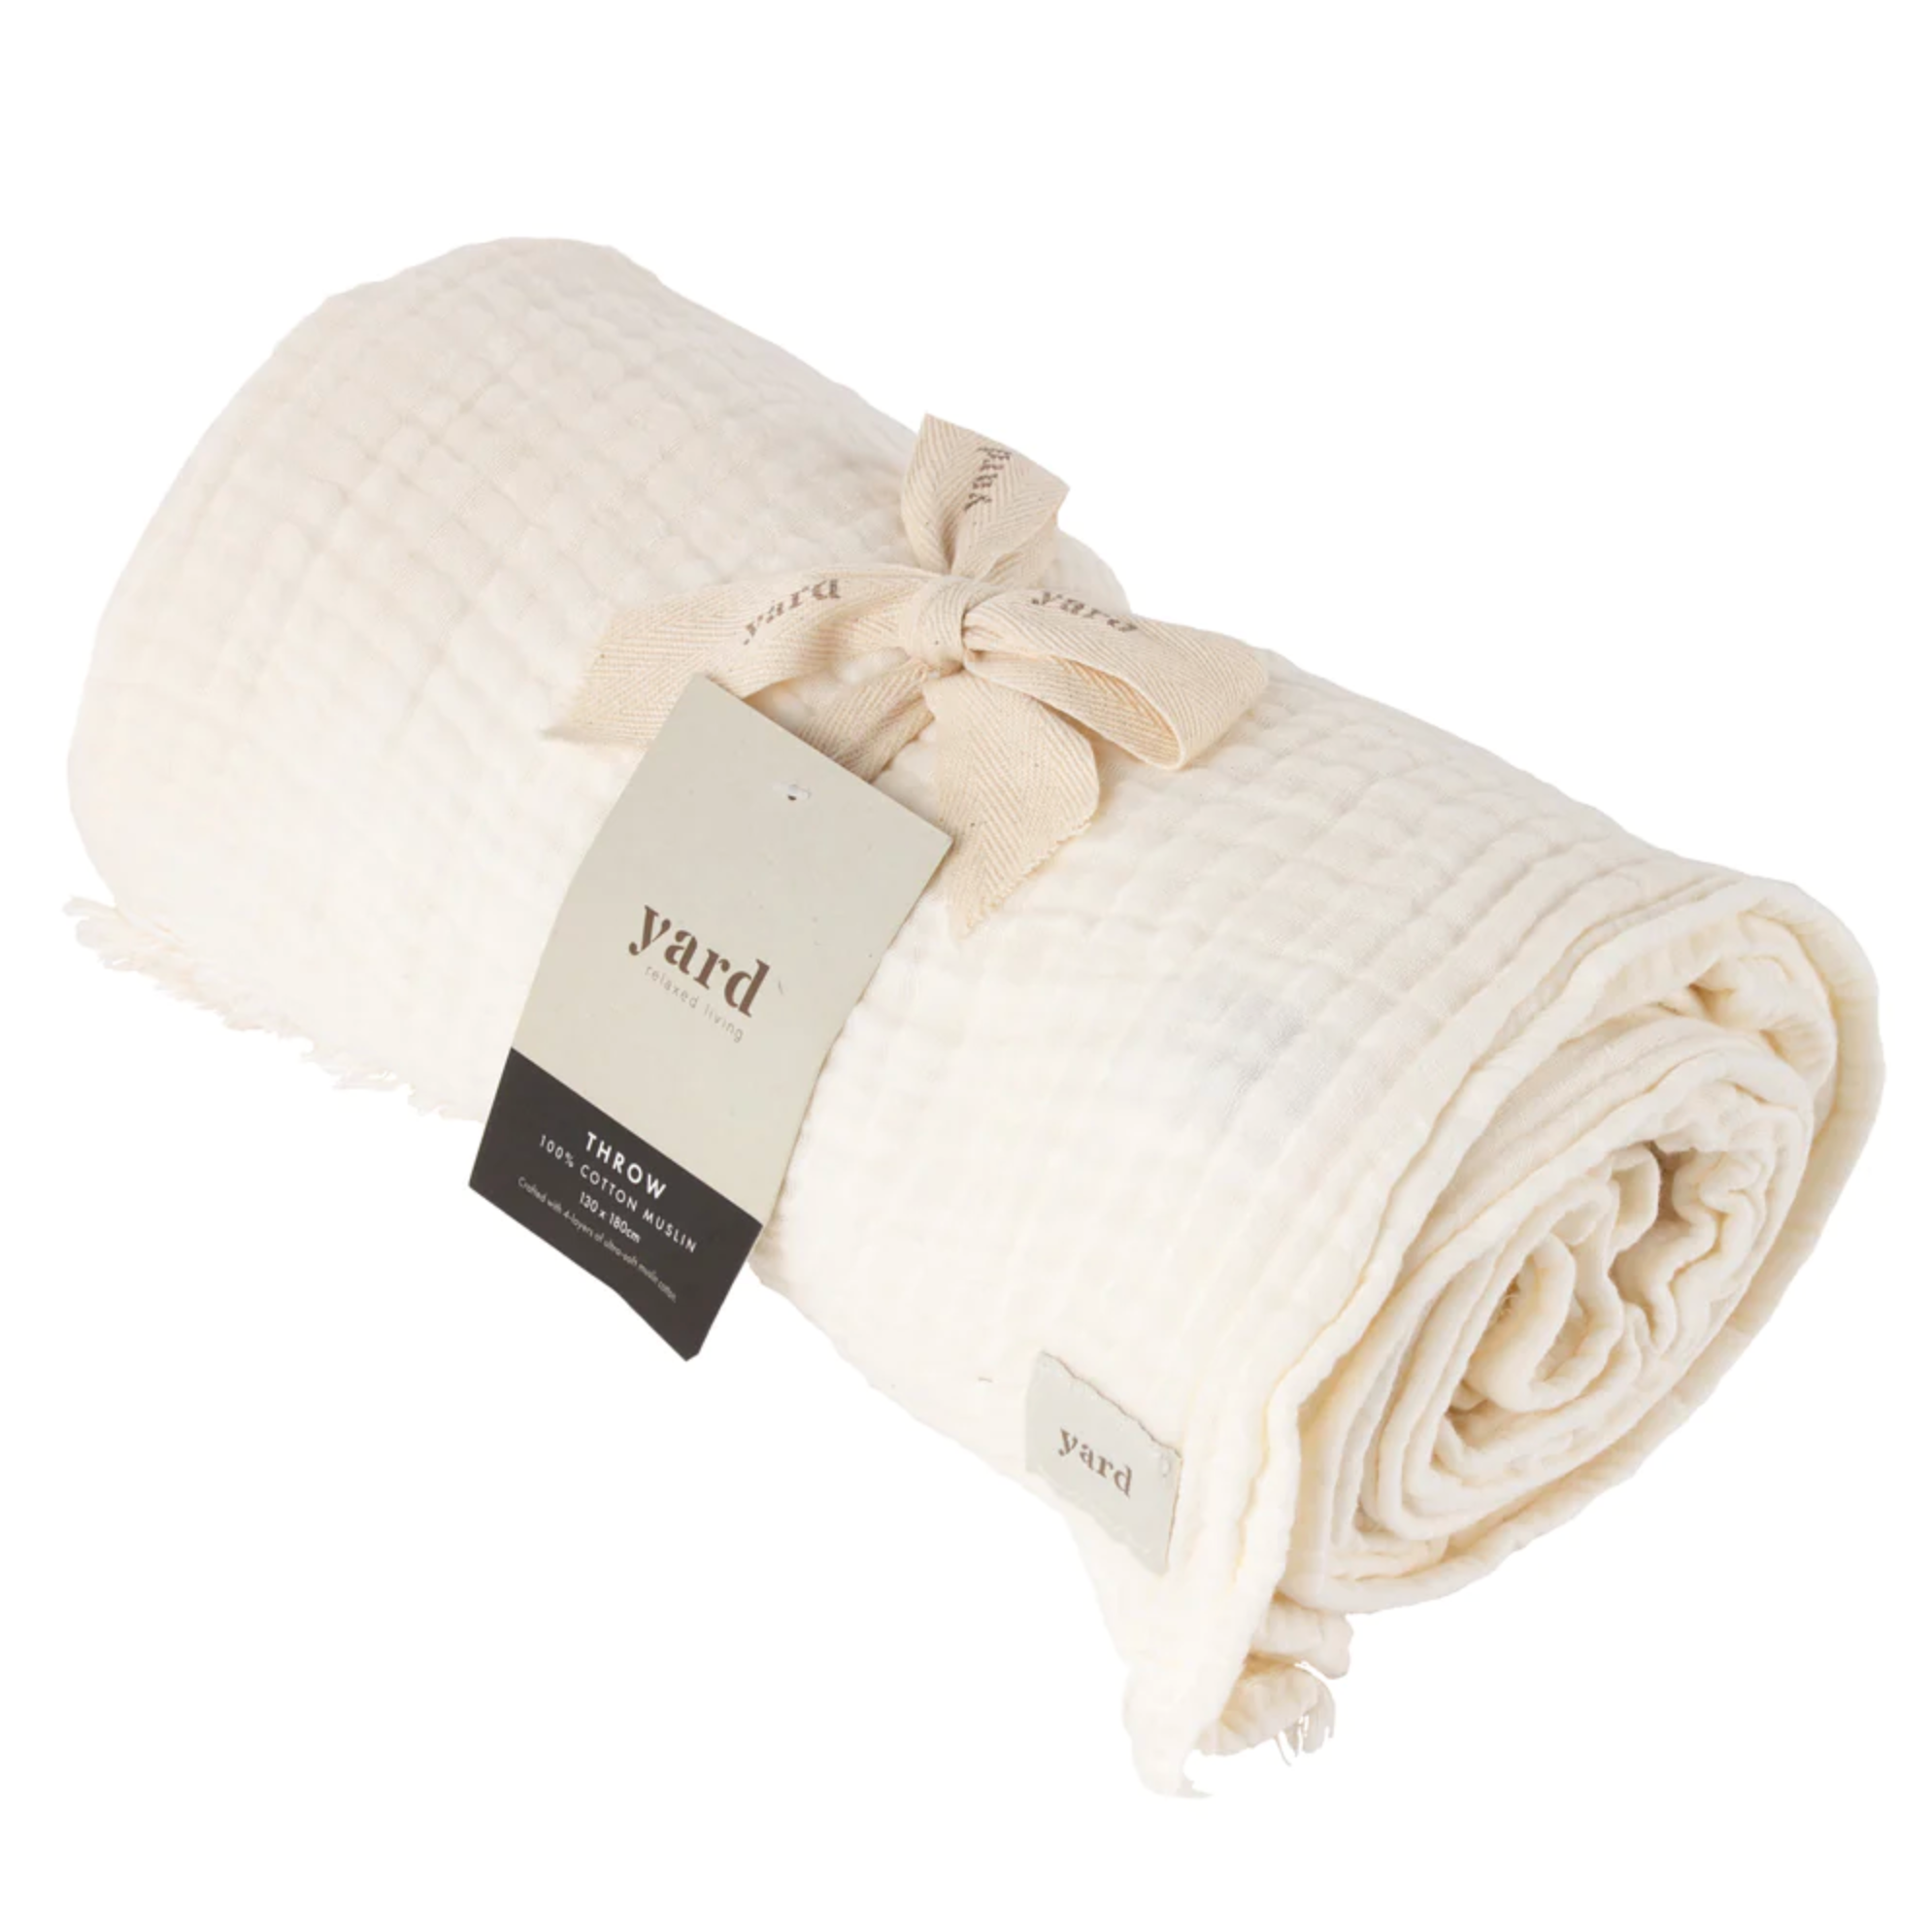 White Muslin Bedspread rolled up and tied neatly with cotton ribbon.